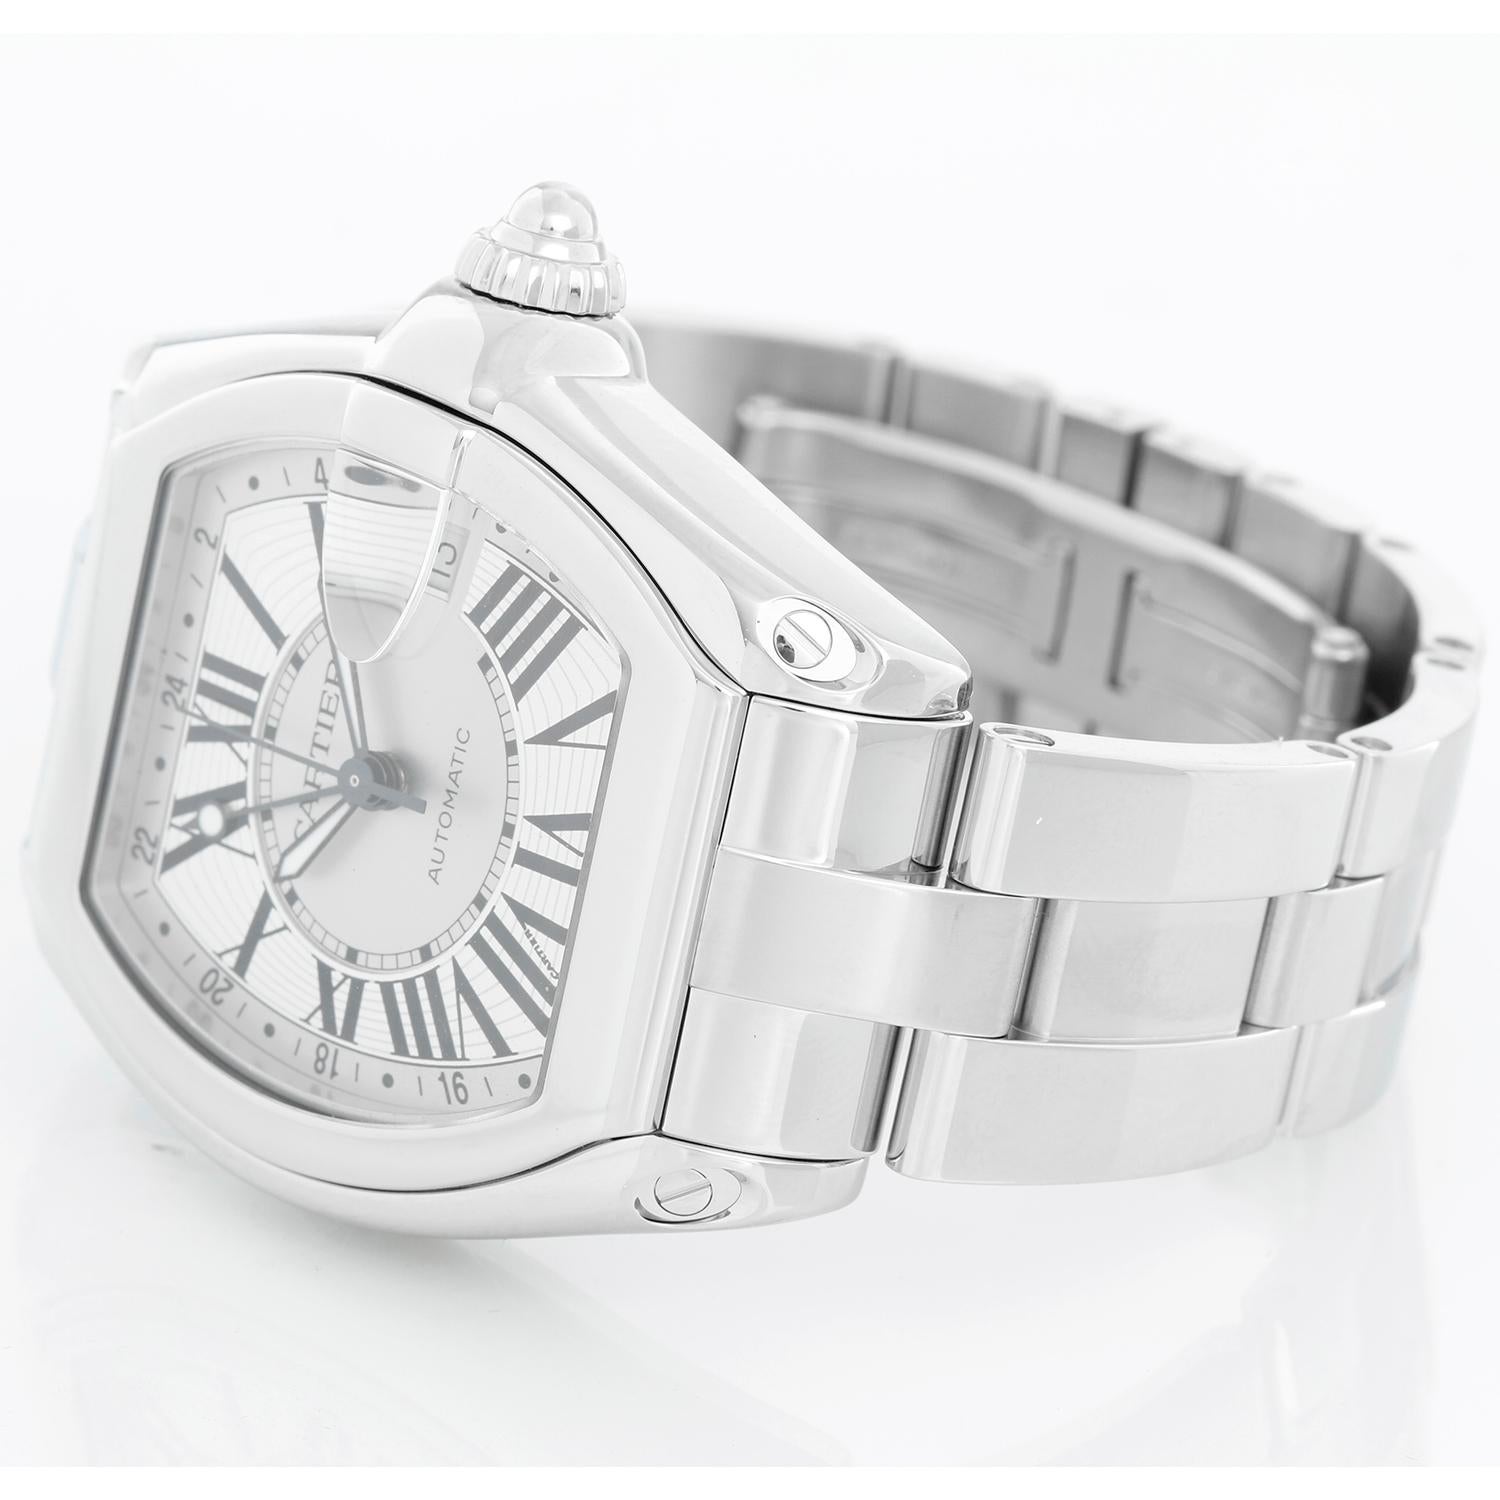 Cartier Roadster GMT Stainless Steel  XL Men's Watch Ref 2722 - Automatic winding with date and GMT features. Stainless steel case (39mm x 48mm). Silver dial with white Roman numerals; date at 3 o'clock. Stainless steel Cartier bracelet with